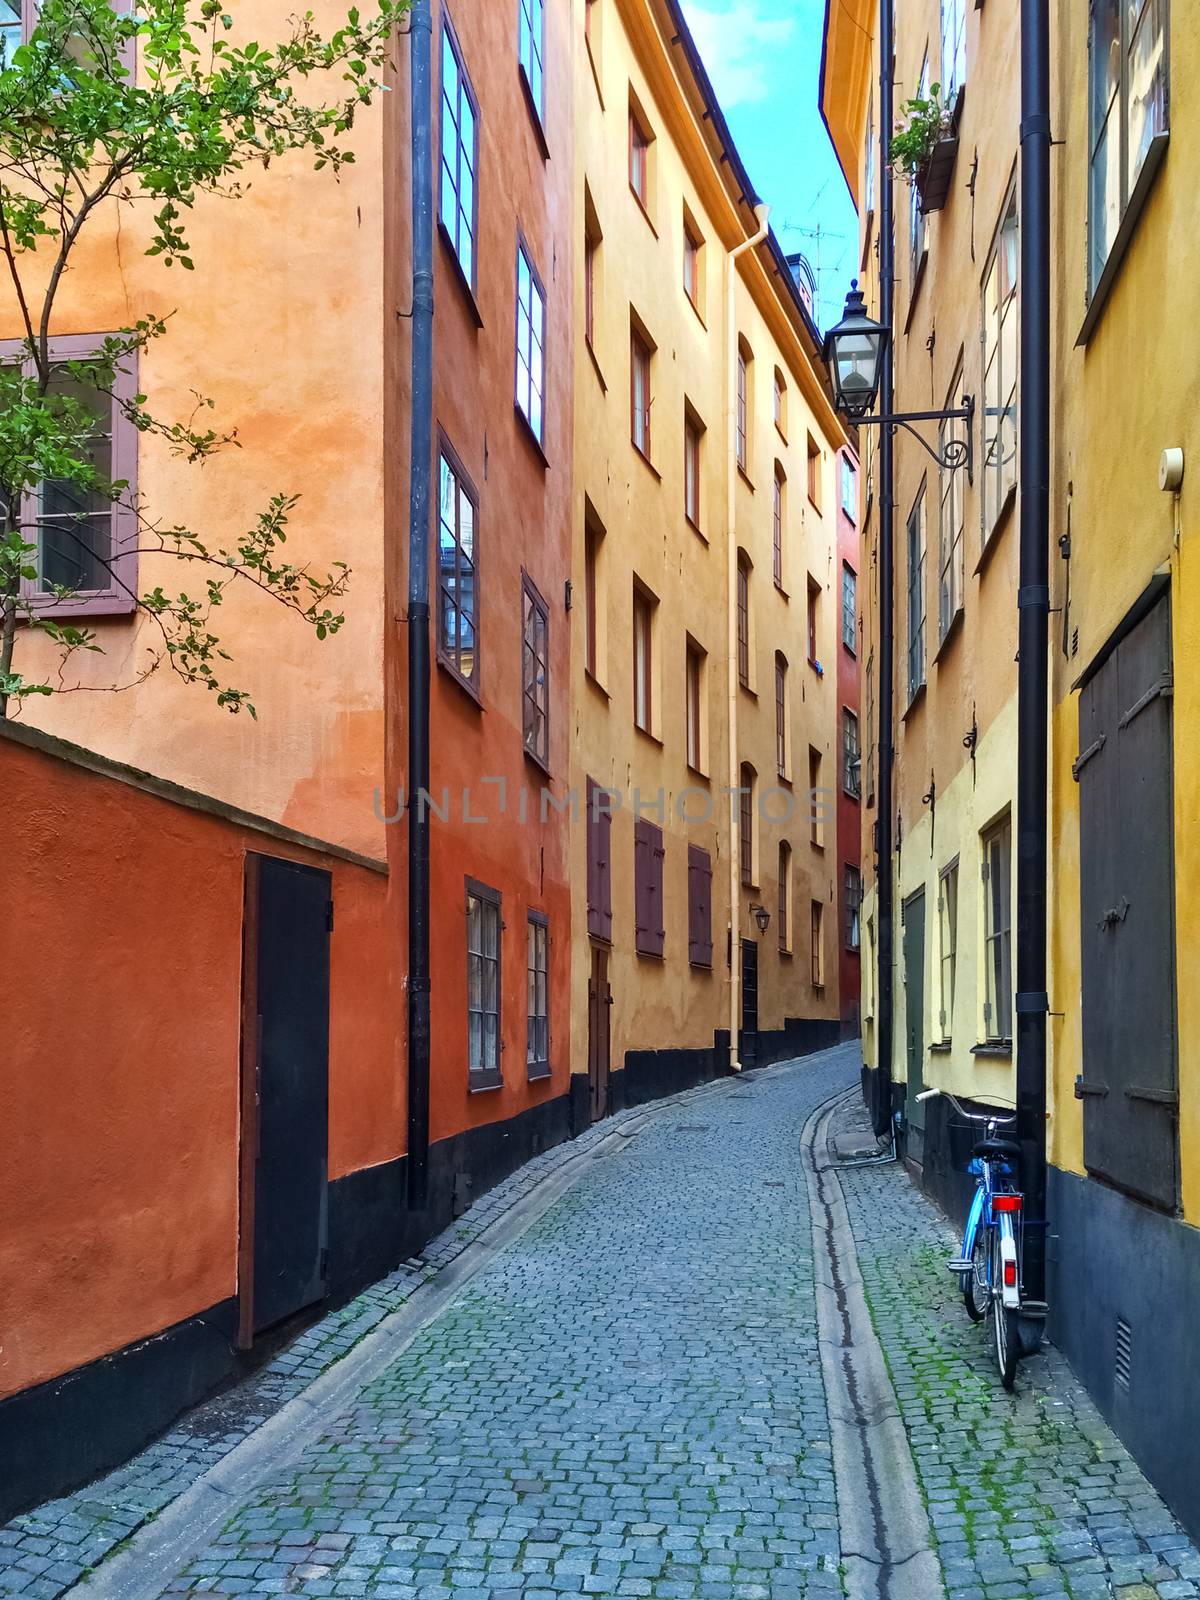 Narrow street with colorful buildings in Stockholm by anikasalsera